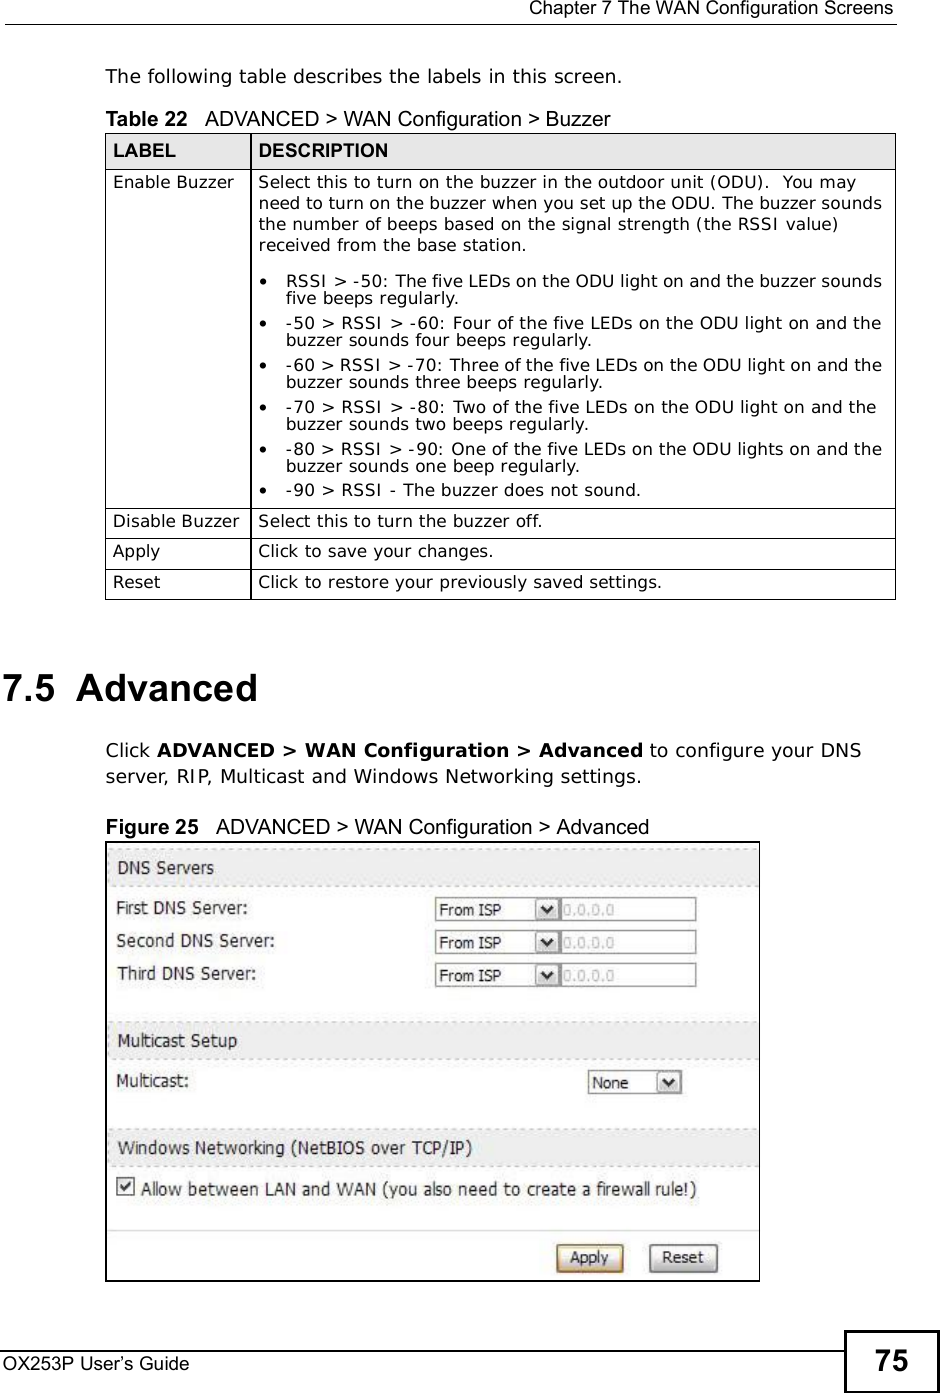  Chapter 7The WAN Configuration ScreensOX253P User’s Guide 75The following table describes the labels in this screen.7.5  AdvancedClick ADVANCED &gt; WAN Configuration &gt; Advanced to configure your DNS server, RIP, Multicast and Windows Networking settings.Figure 25   ADVANCED &gt; WAN Configuration &gt; Advanced     Table 22   ADVANCED &gt; WAN Configuration &gt; BuzzerLABEL DESCRIPTIONEnable BuzzerSelect this to turn on the buzzer in the outdoor unit (ODU).  You may need to turn on the buzzer when you set up the ODU. The buzzer sounds the number of beeps based on the signal strength (the RSSI value) received from the base station.•RSSI &gt; -50: The five LEDs on the ODU light on and the buzzer sounds five beeps regularly. •-50 &gt; RSSI &gt; -60: Four of the five LEDs on the ODU light on and the buzzer sounds four beeps regularly.•-60 &gt; RSSI &gt; -70: Three of the five LEDs on the ODU light on and the buzzer sounds three beeps regularly.•-70 &gt; RSSI &gt; -80: Two of the five LEDs on the ODU light on and the buzzer sounds two beeps regularly.•-80 &gt; RSSI &gt; -90: One of the five LEDs on the ODU lights on and the buzzer sounds one beep regularly.•-90 &gt; RSSI - The buzzer does not sound.Disable BuzzerSelect this to turn the buzzer off.ApplyClick to save your changes.ResetClick to restore your previously saved settings.